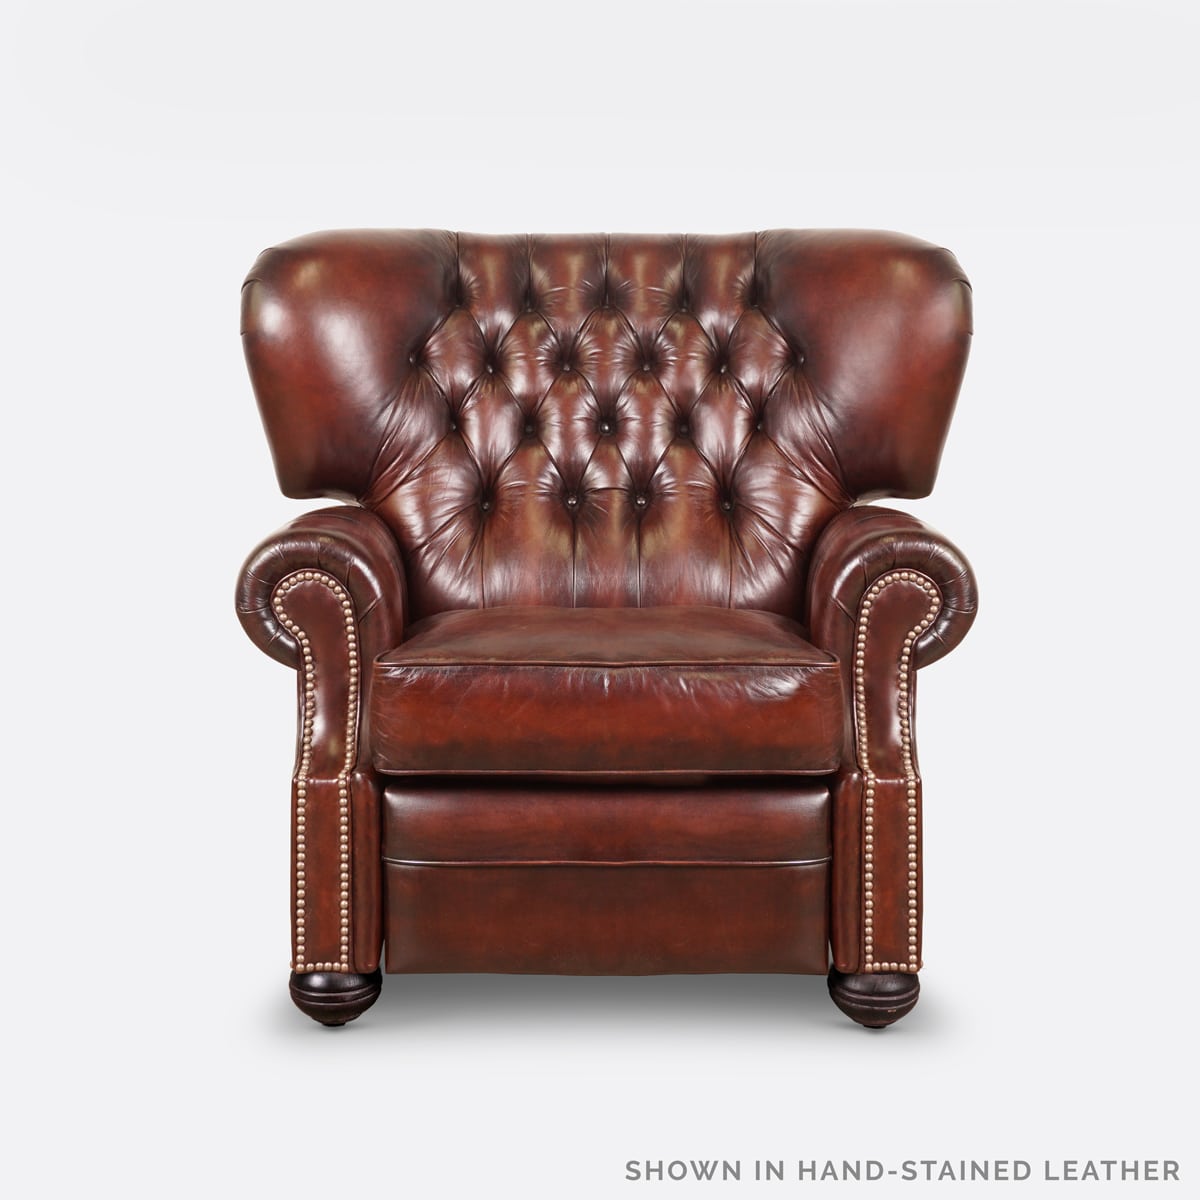 Benjamin Recliner in Hand-Stained Leather